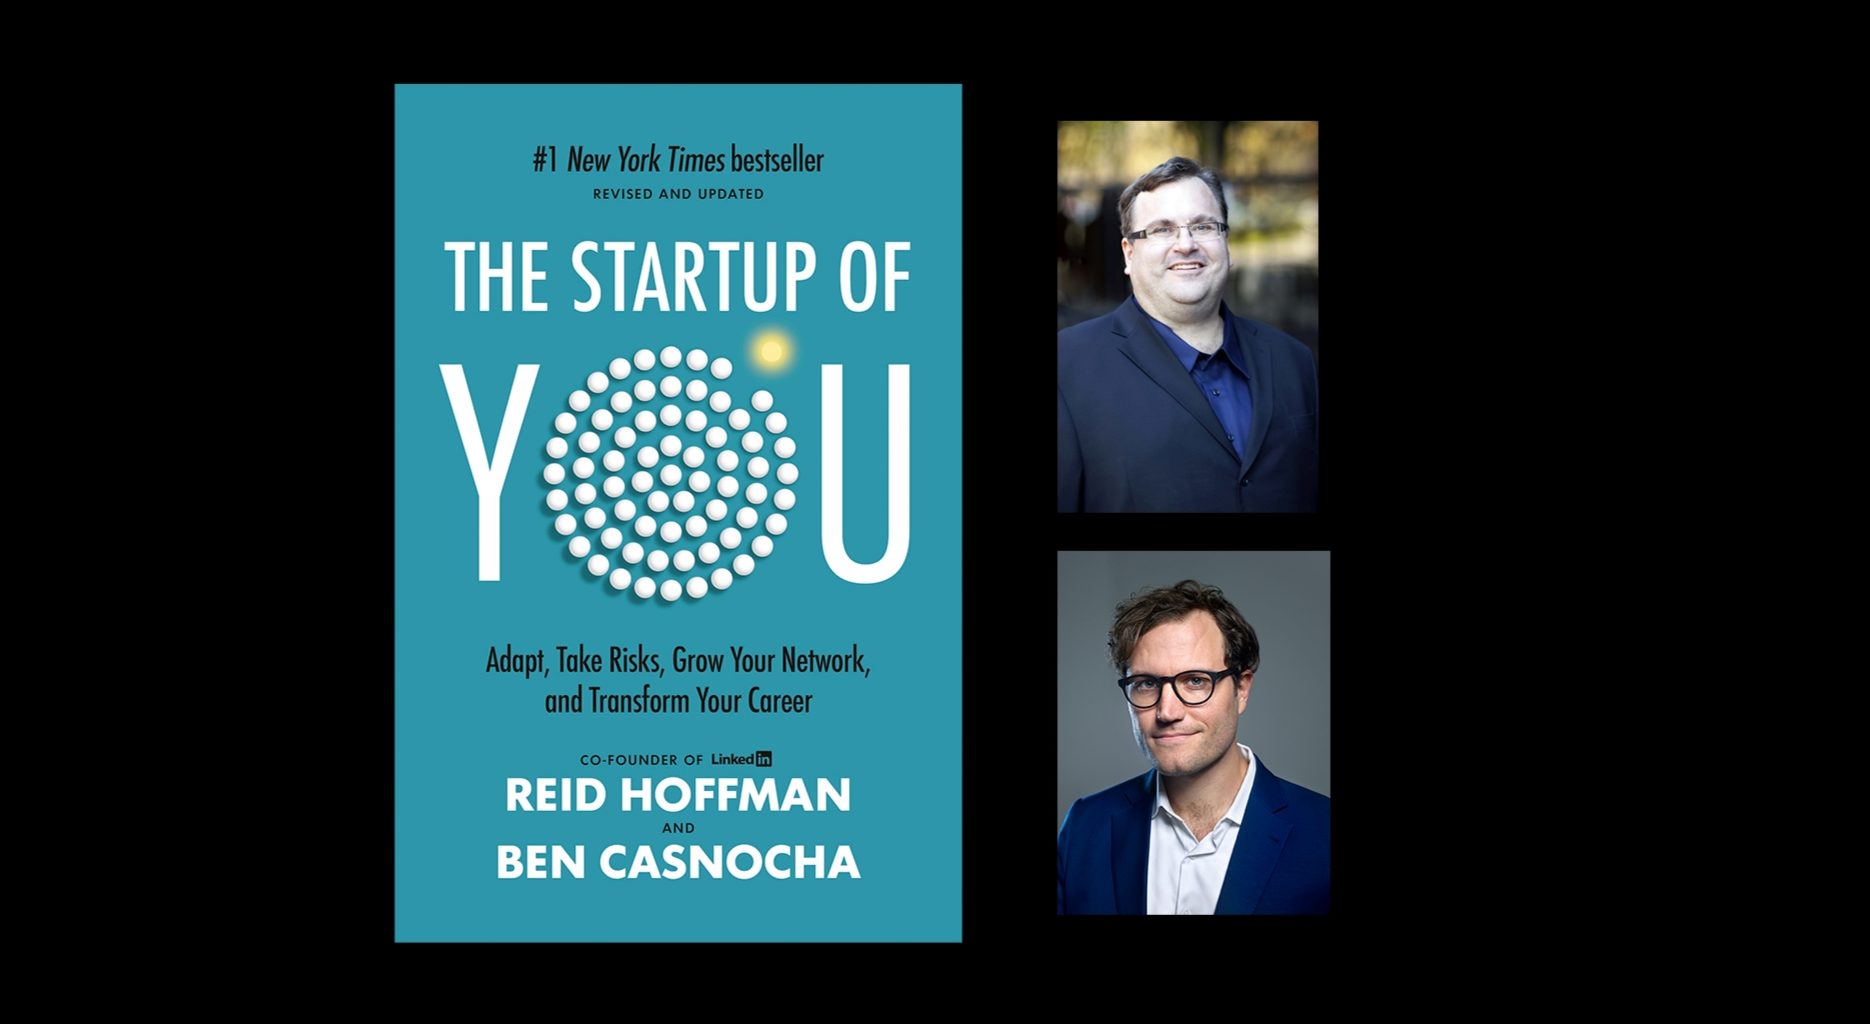 startup of you